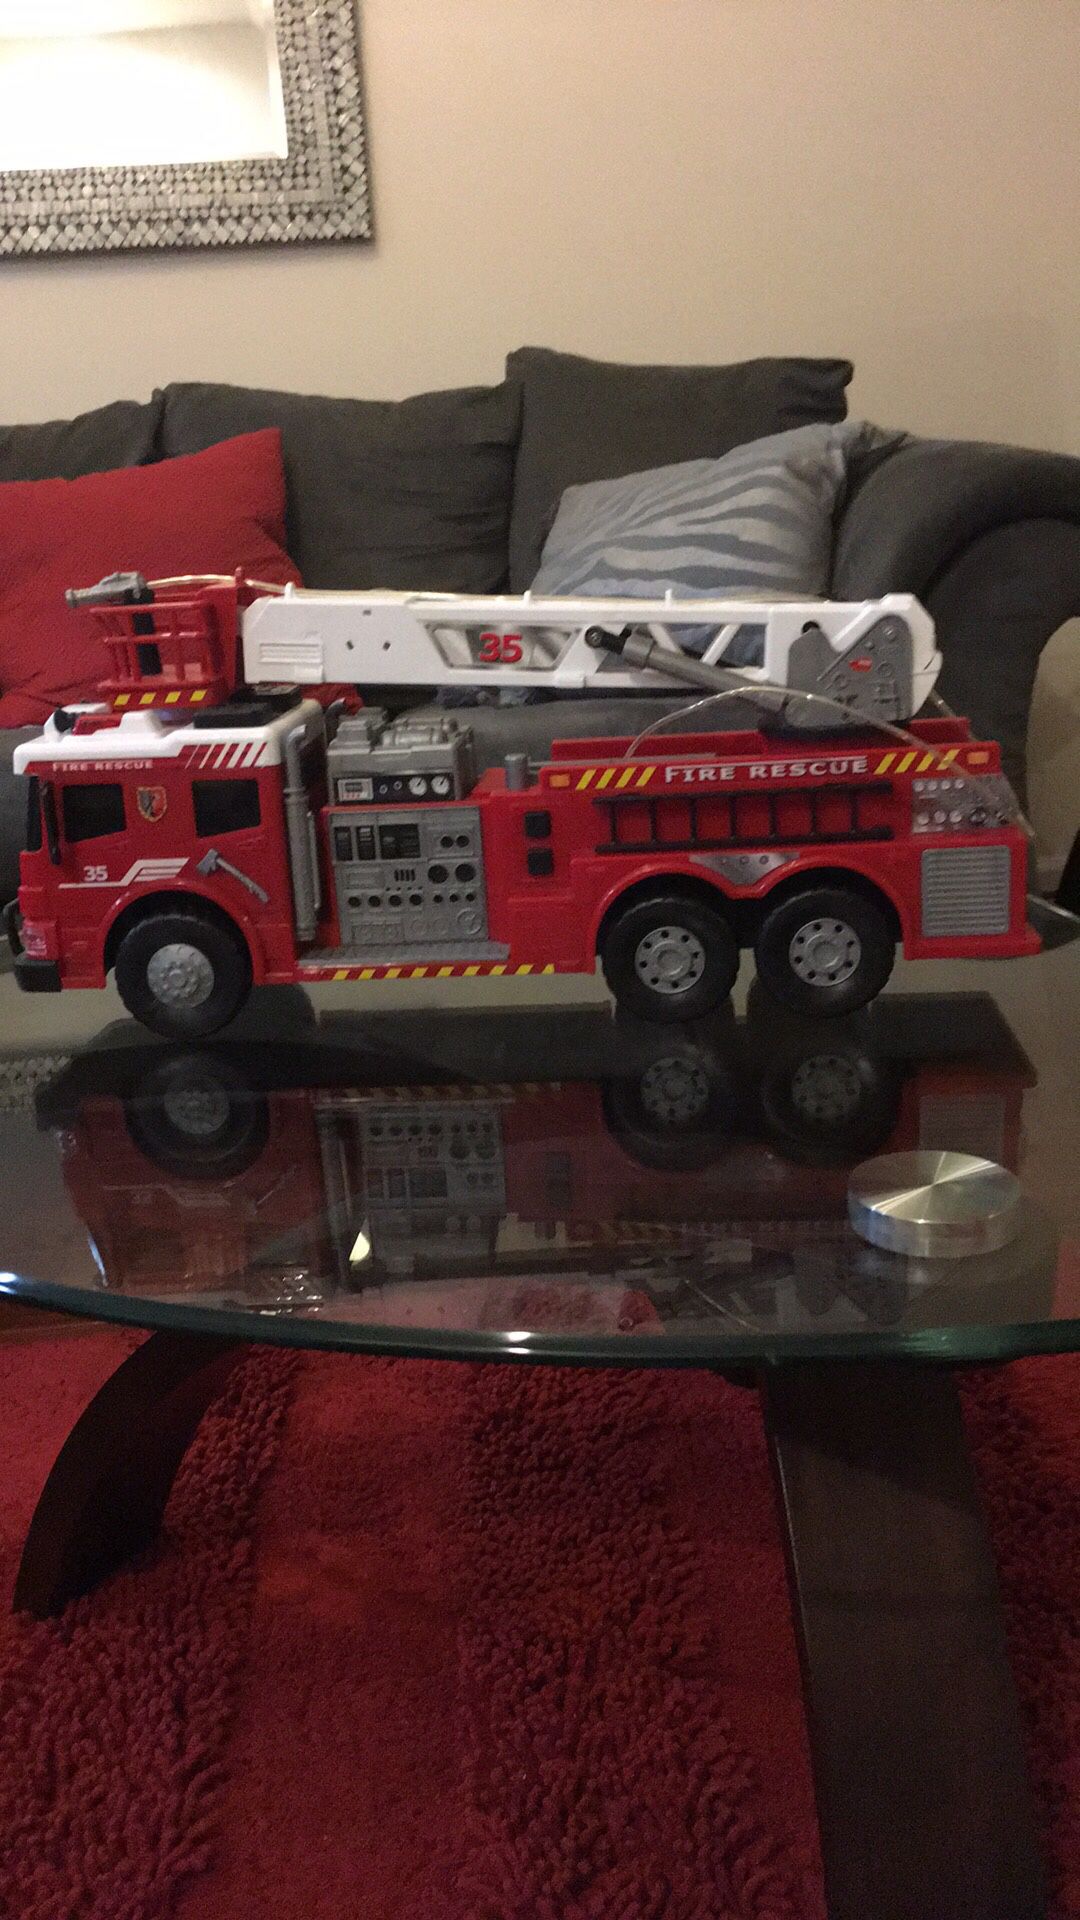 Fire Brigade Truck Toy Fire Truck By Dickie Kids Toys